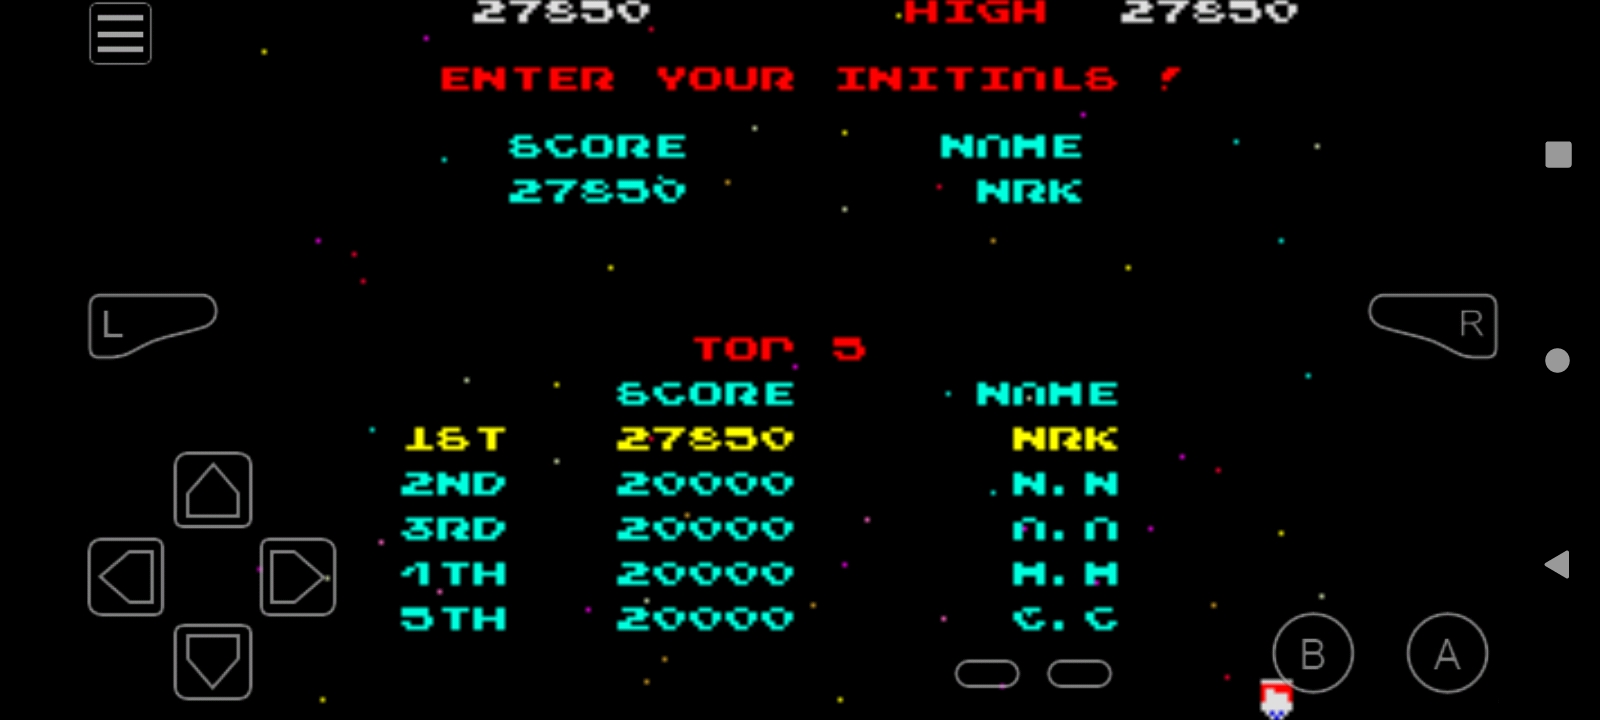 Hauntedprogram: Namco Museum 50th Anniversary: Galaga (GBA Emulated) 27,850 points on 2022-07-31 00:33:33